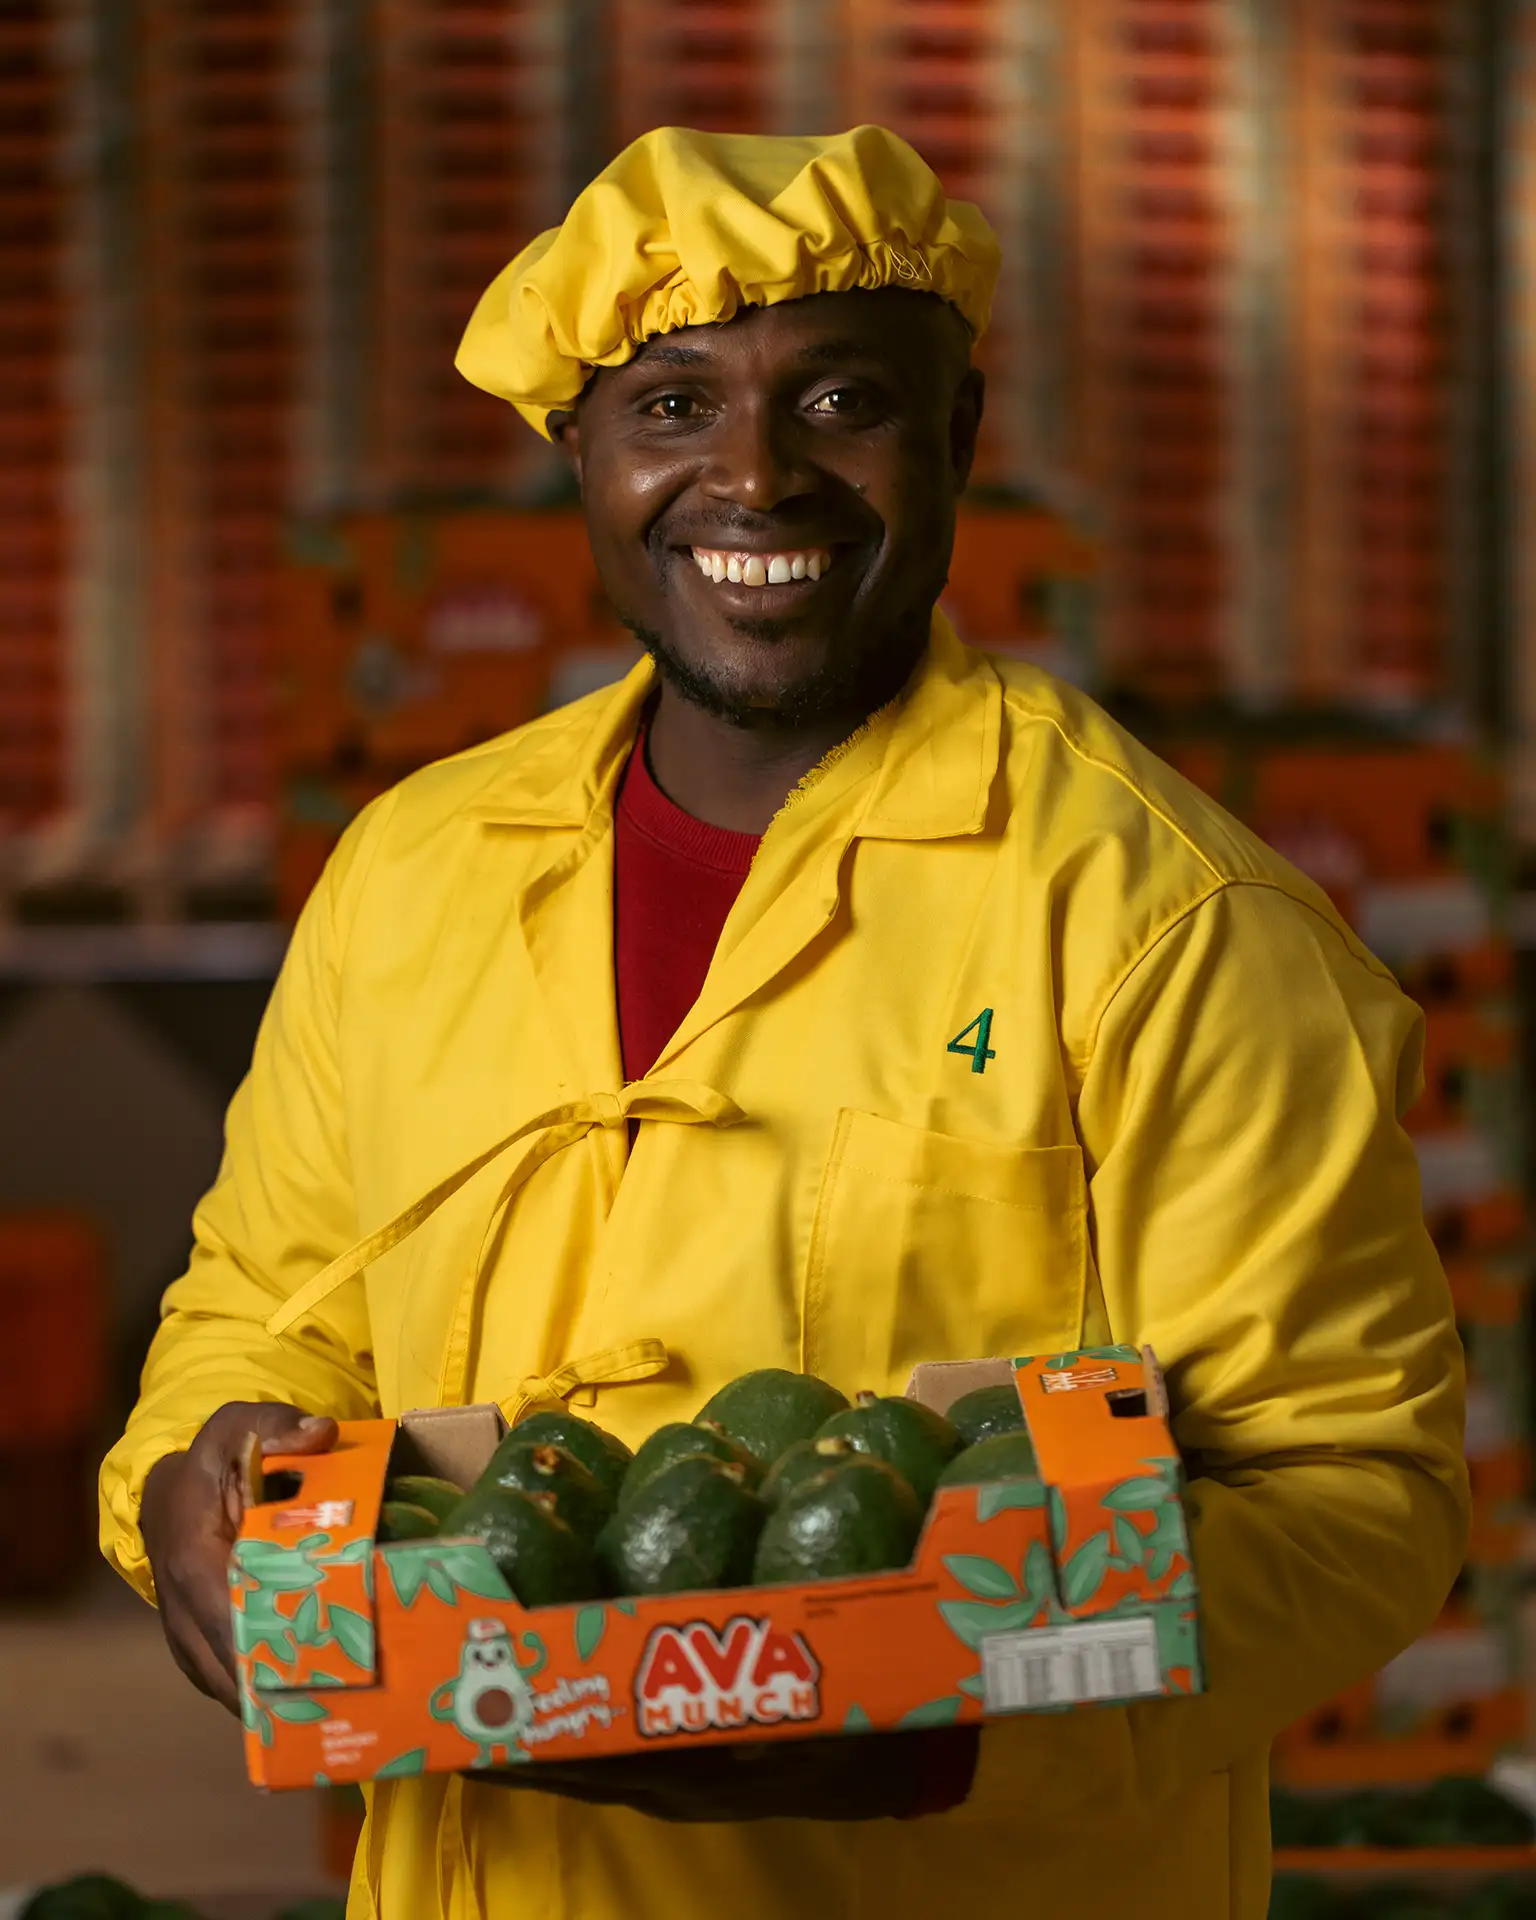 Image of an Avo Group worker at the Njombe pack house in Tanzania.